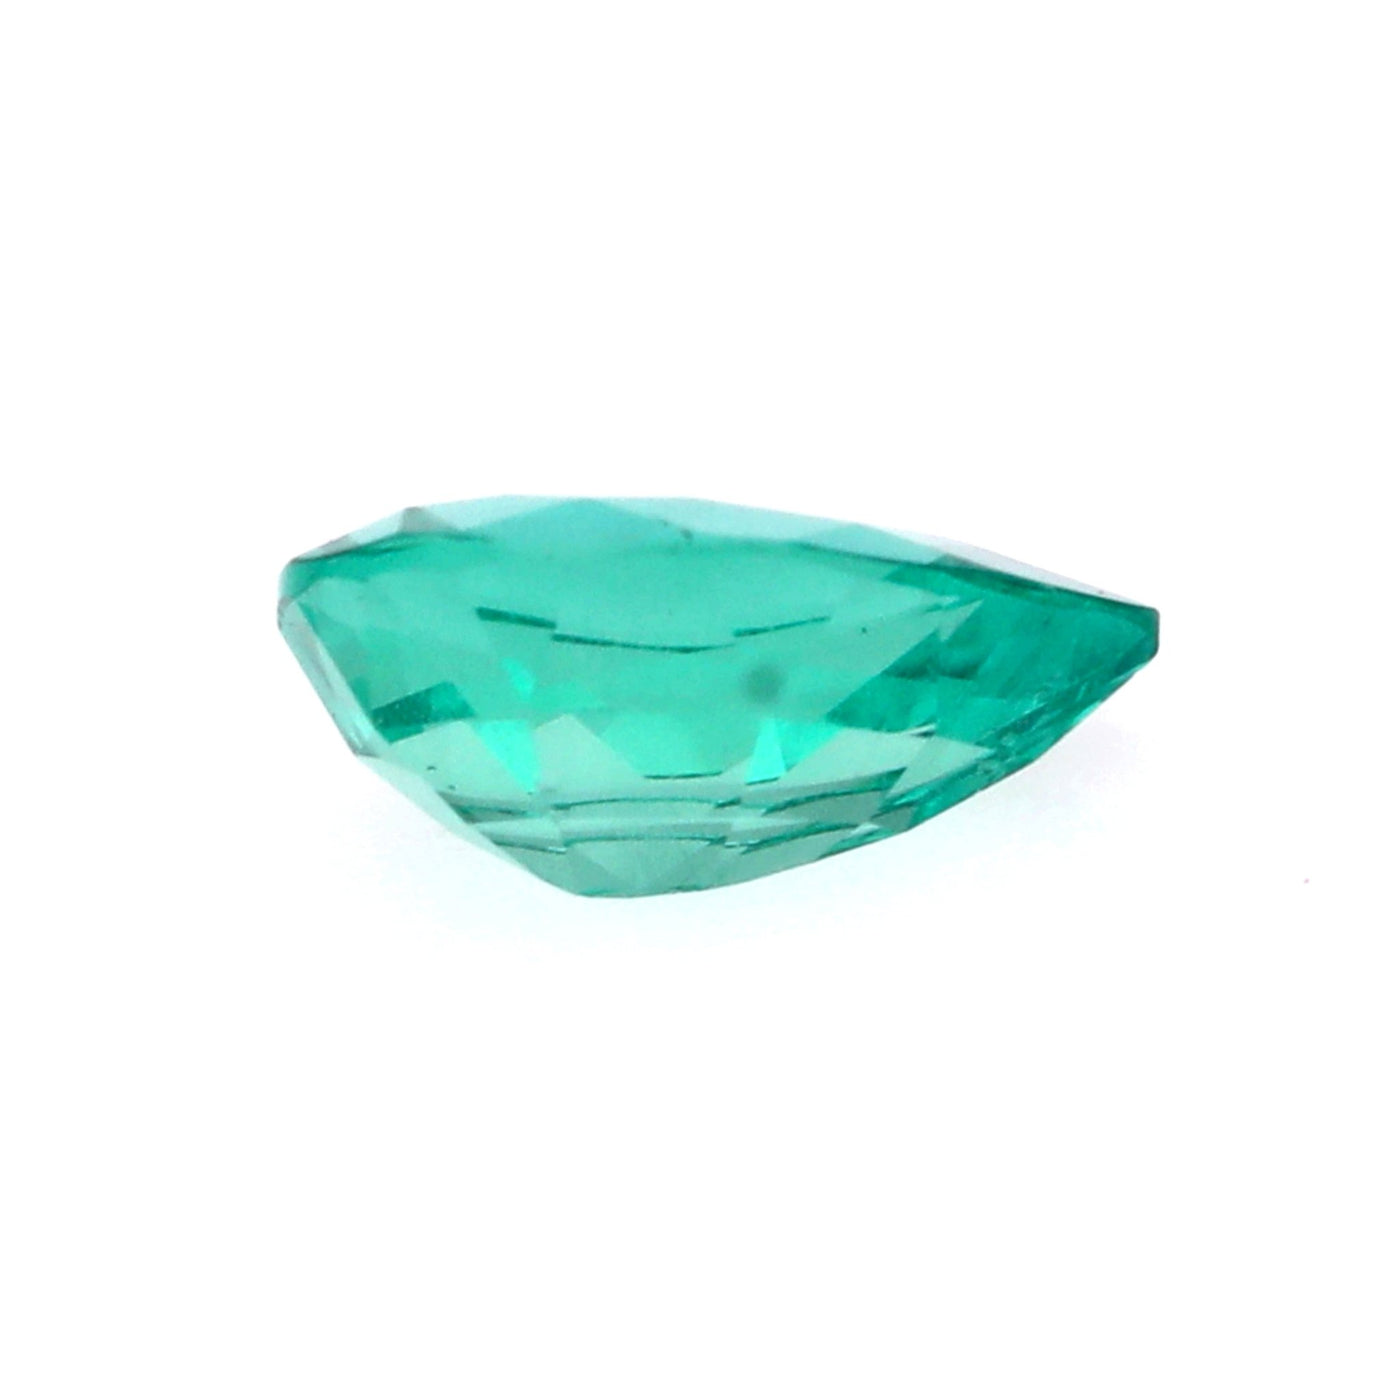 0.86CT Pear Shaped Emerald - Belmont Sparkle